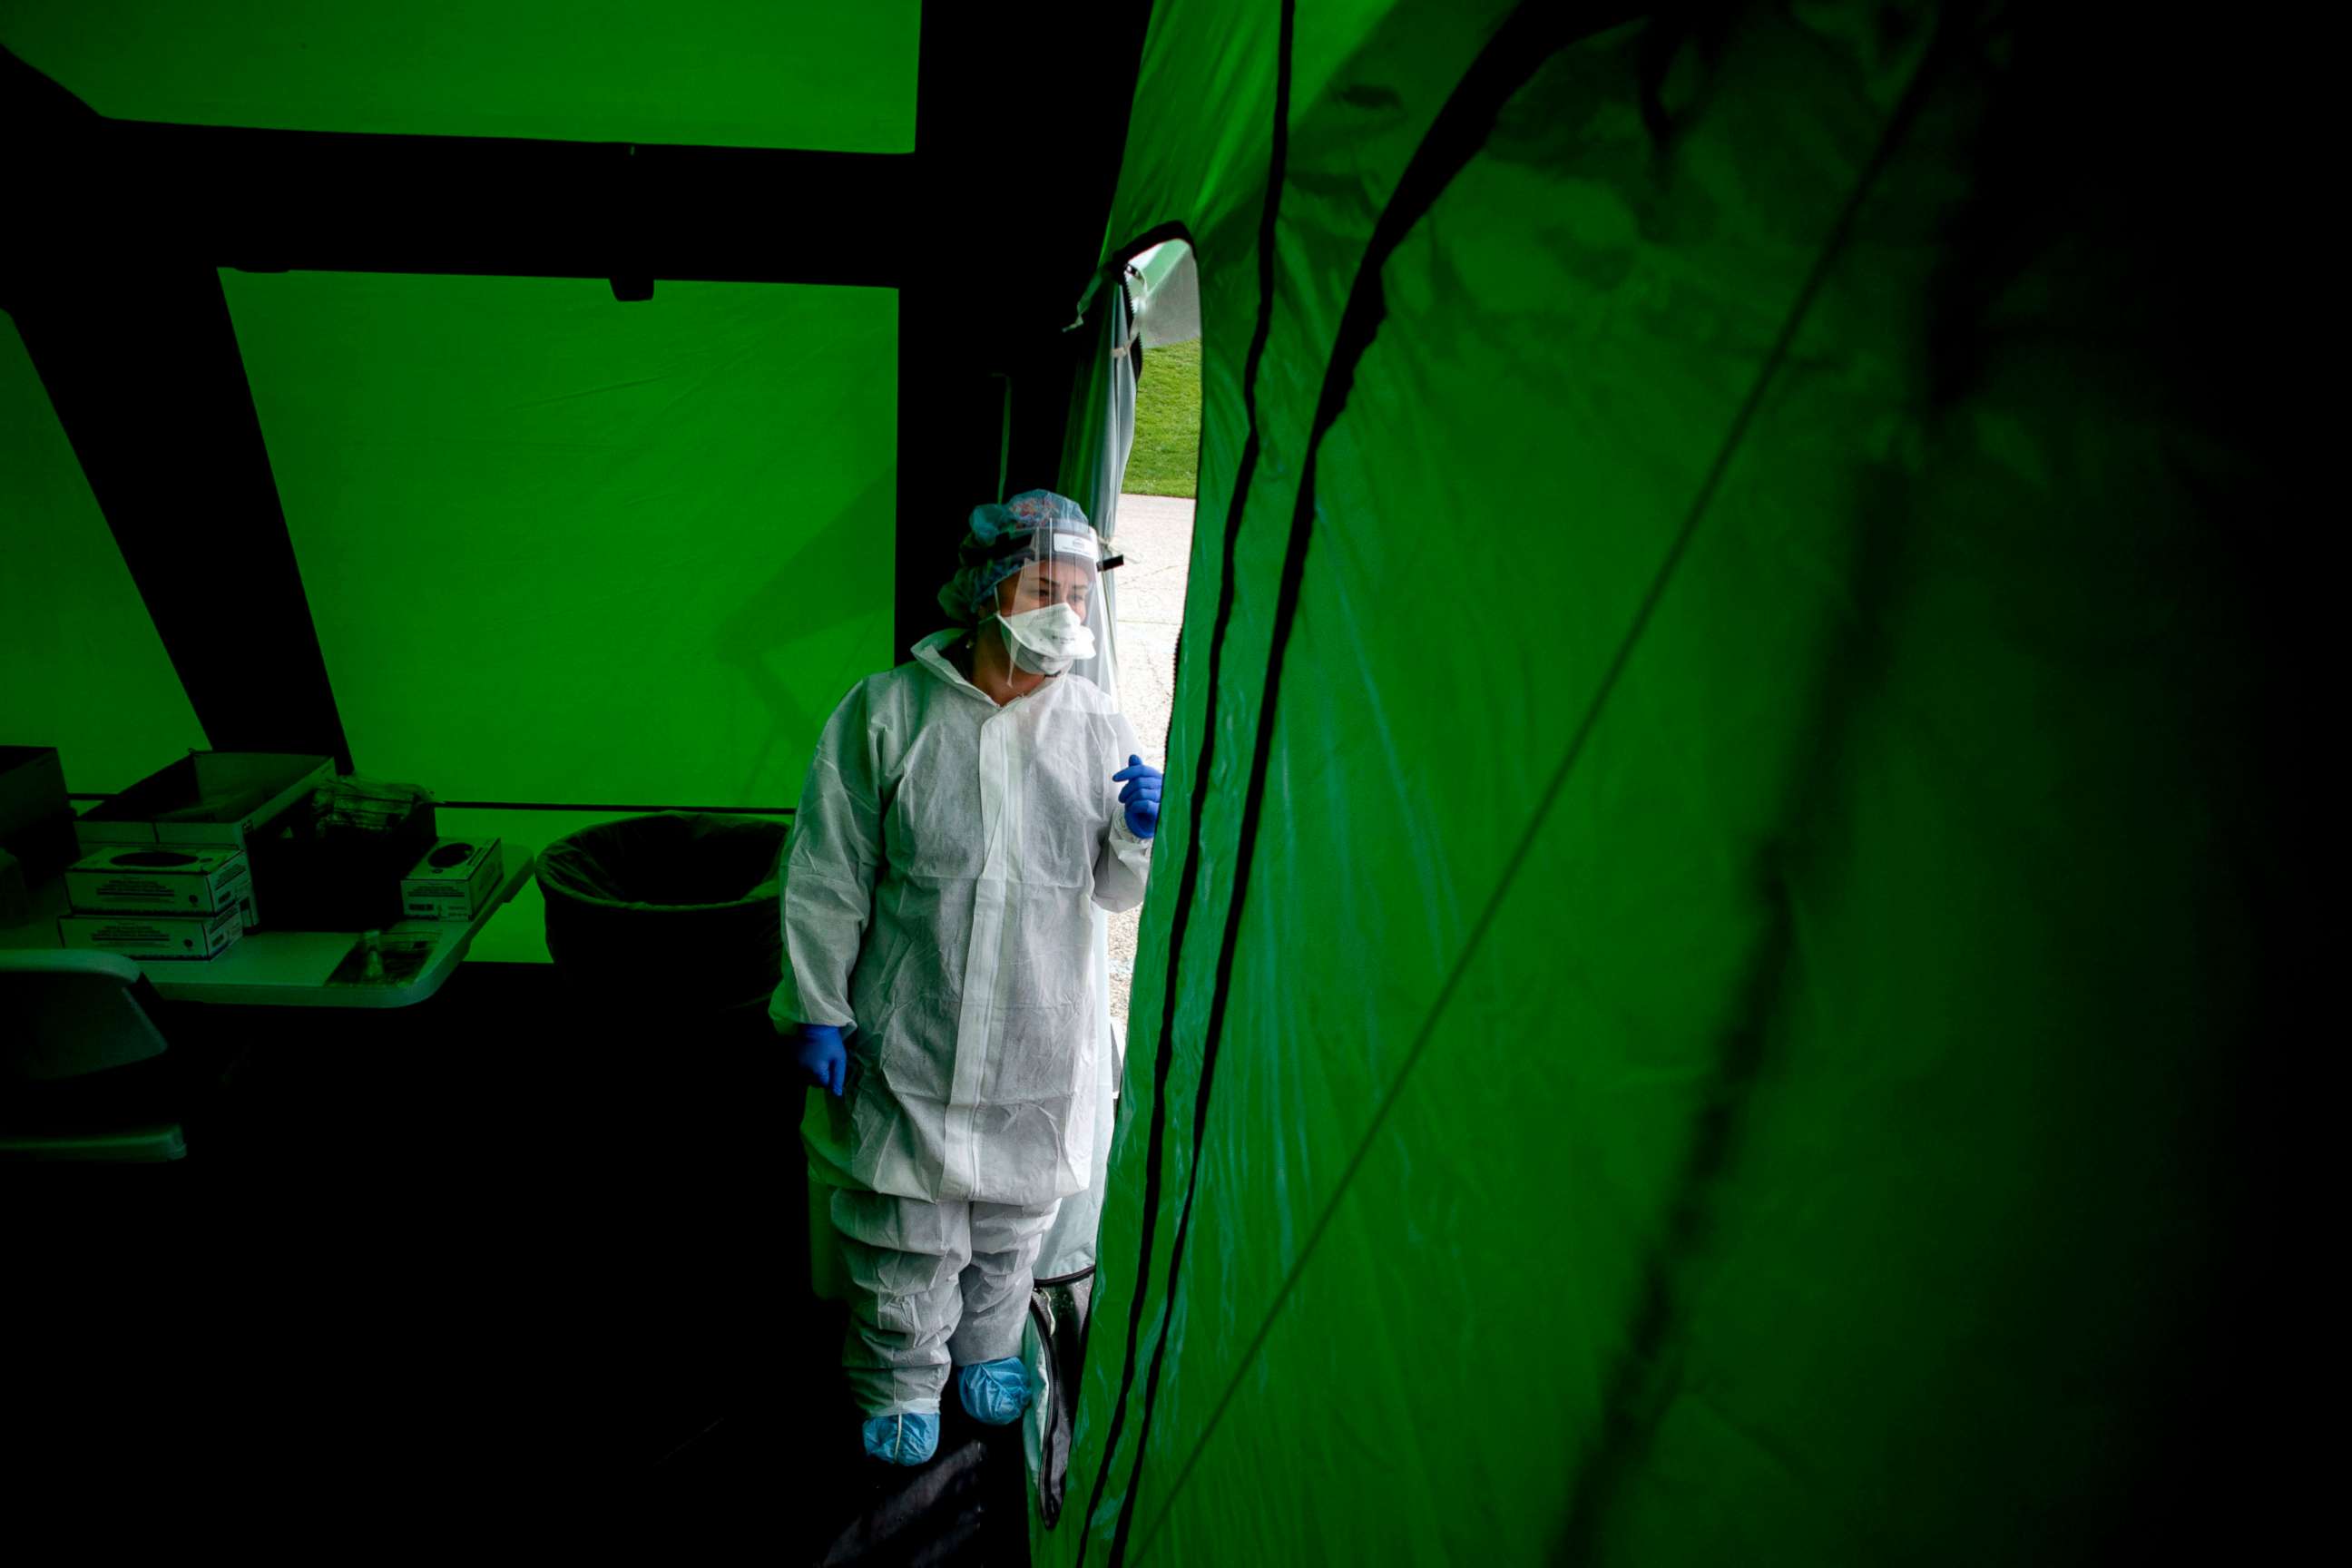 PHOTO: Amanda Zacek, a certified medical assistant from Swartz Creek, peeks out from the tent, April 15, 2020, at Atwood Stadium in Flint, Mich.